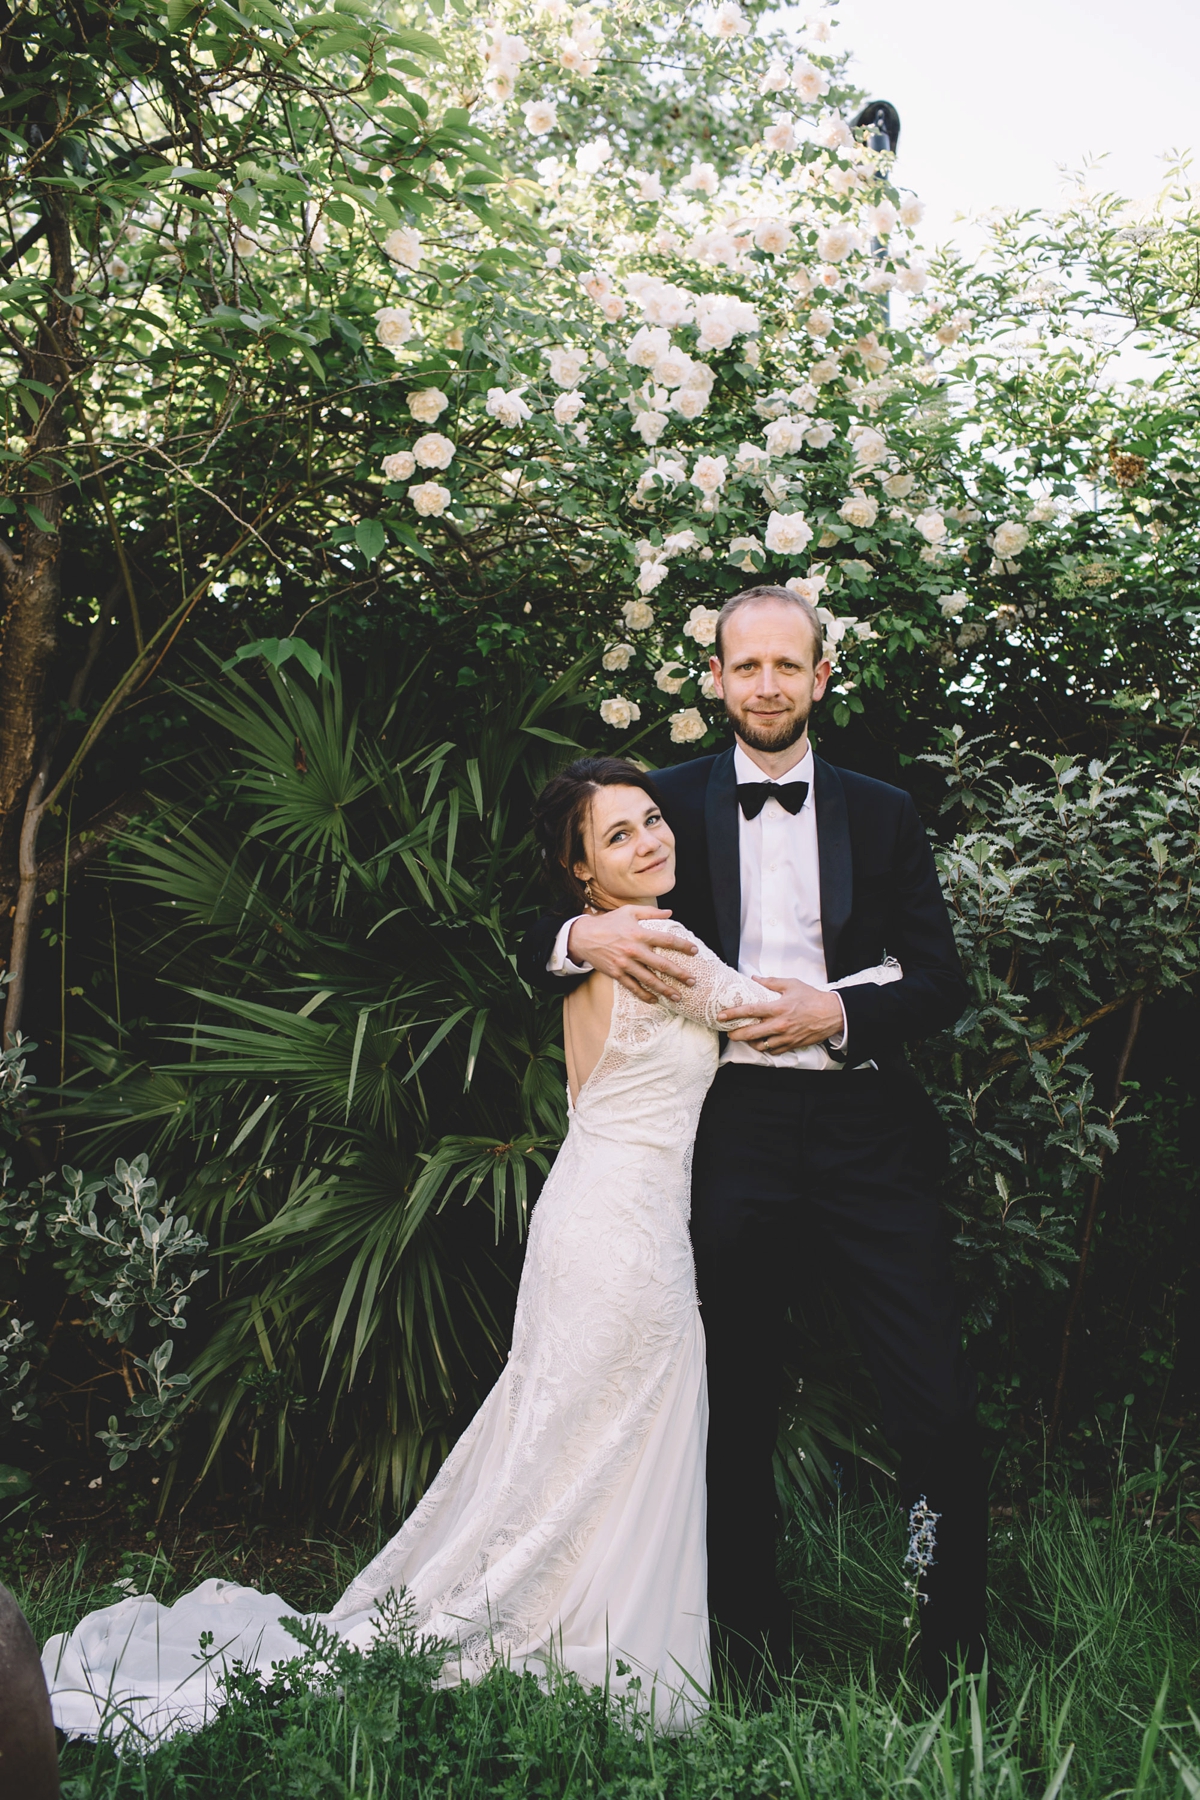 28 A Grace Loves Lace gown for a DIY garden wedding inspired by nature and flowers